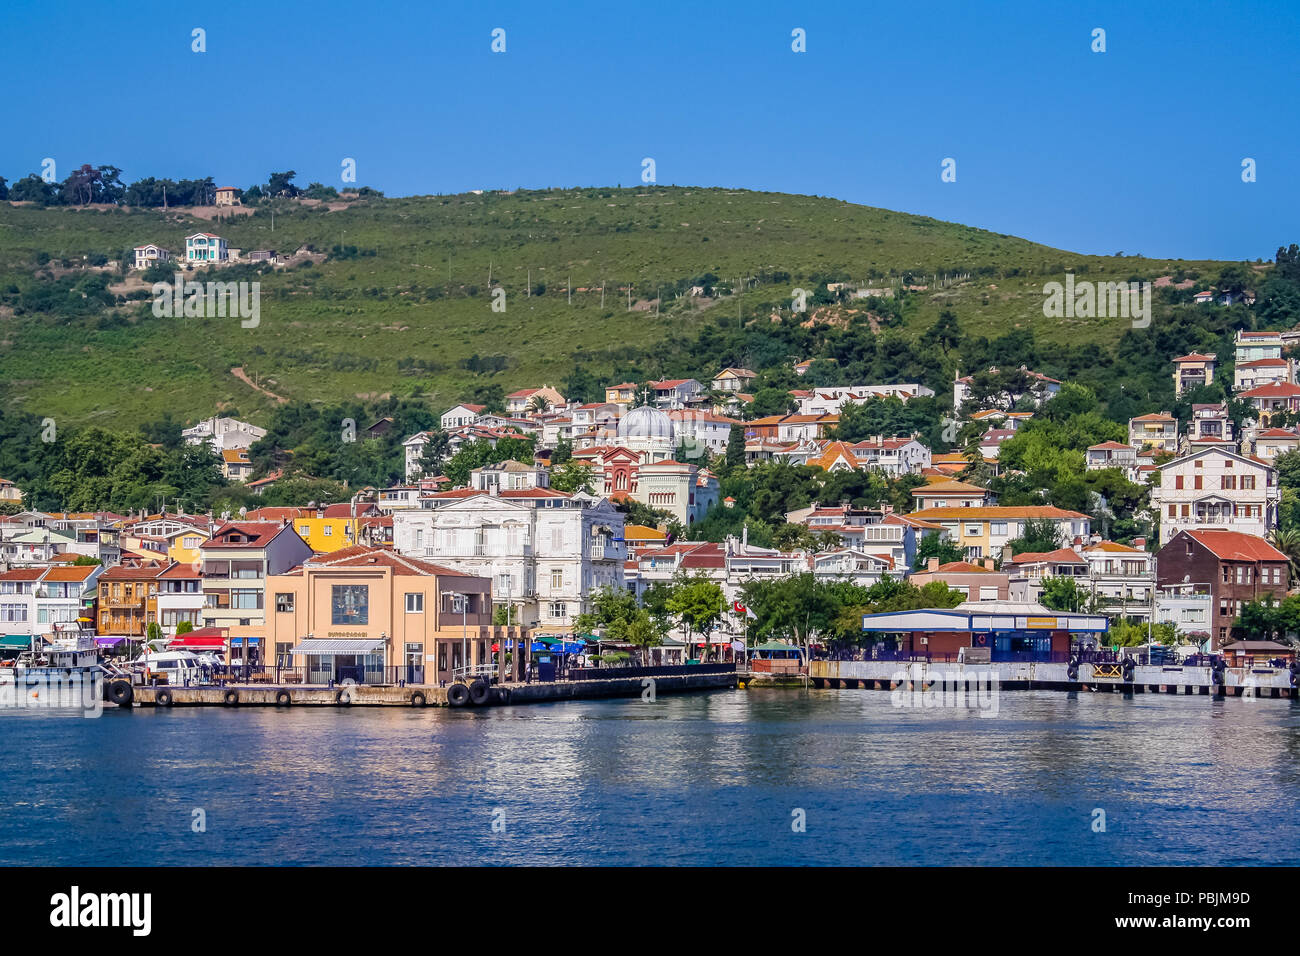 Istanbul, Turkey, July 13, 2010: View of the port of Burgazada, one of the Princes Islands. Stock Photo